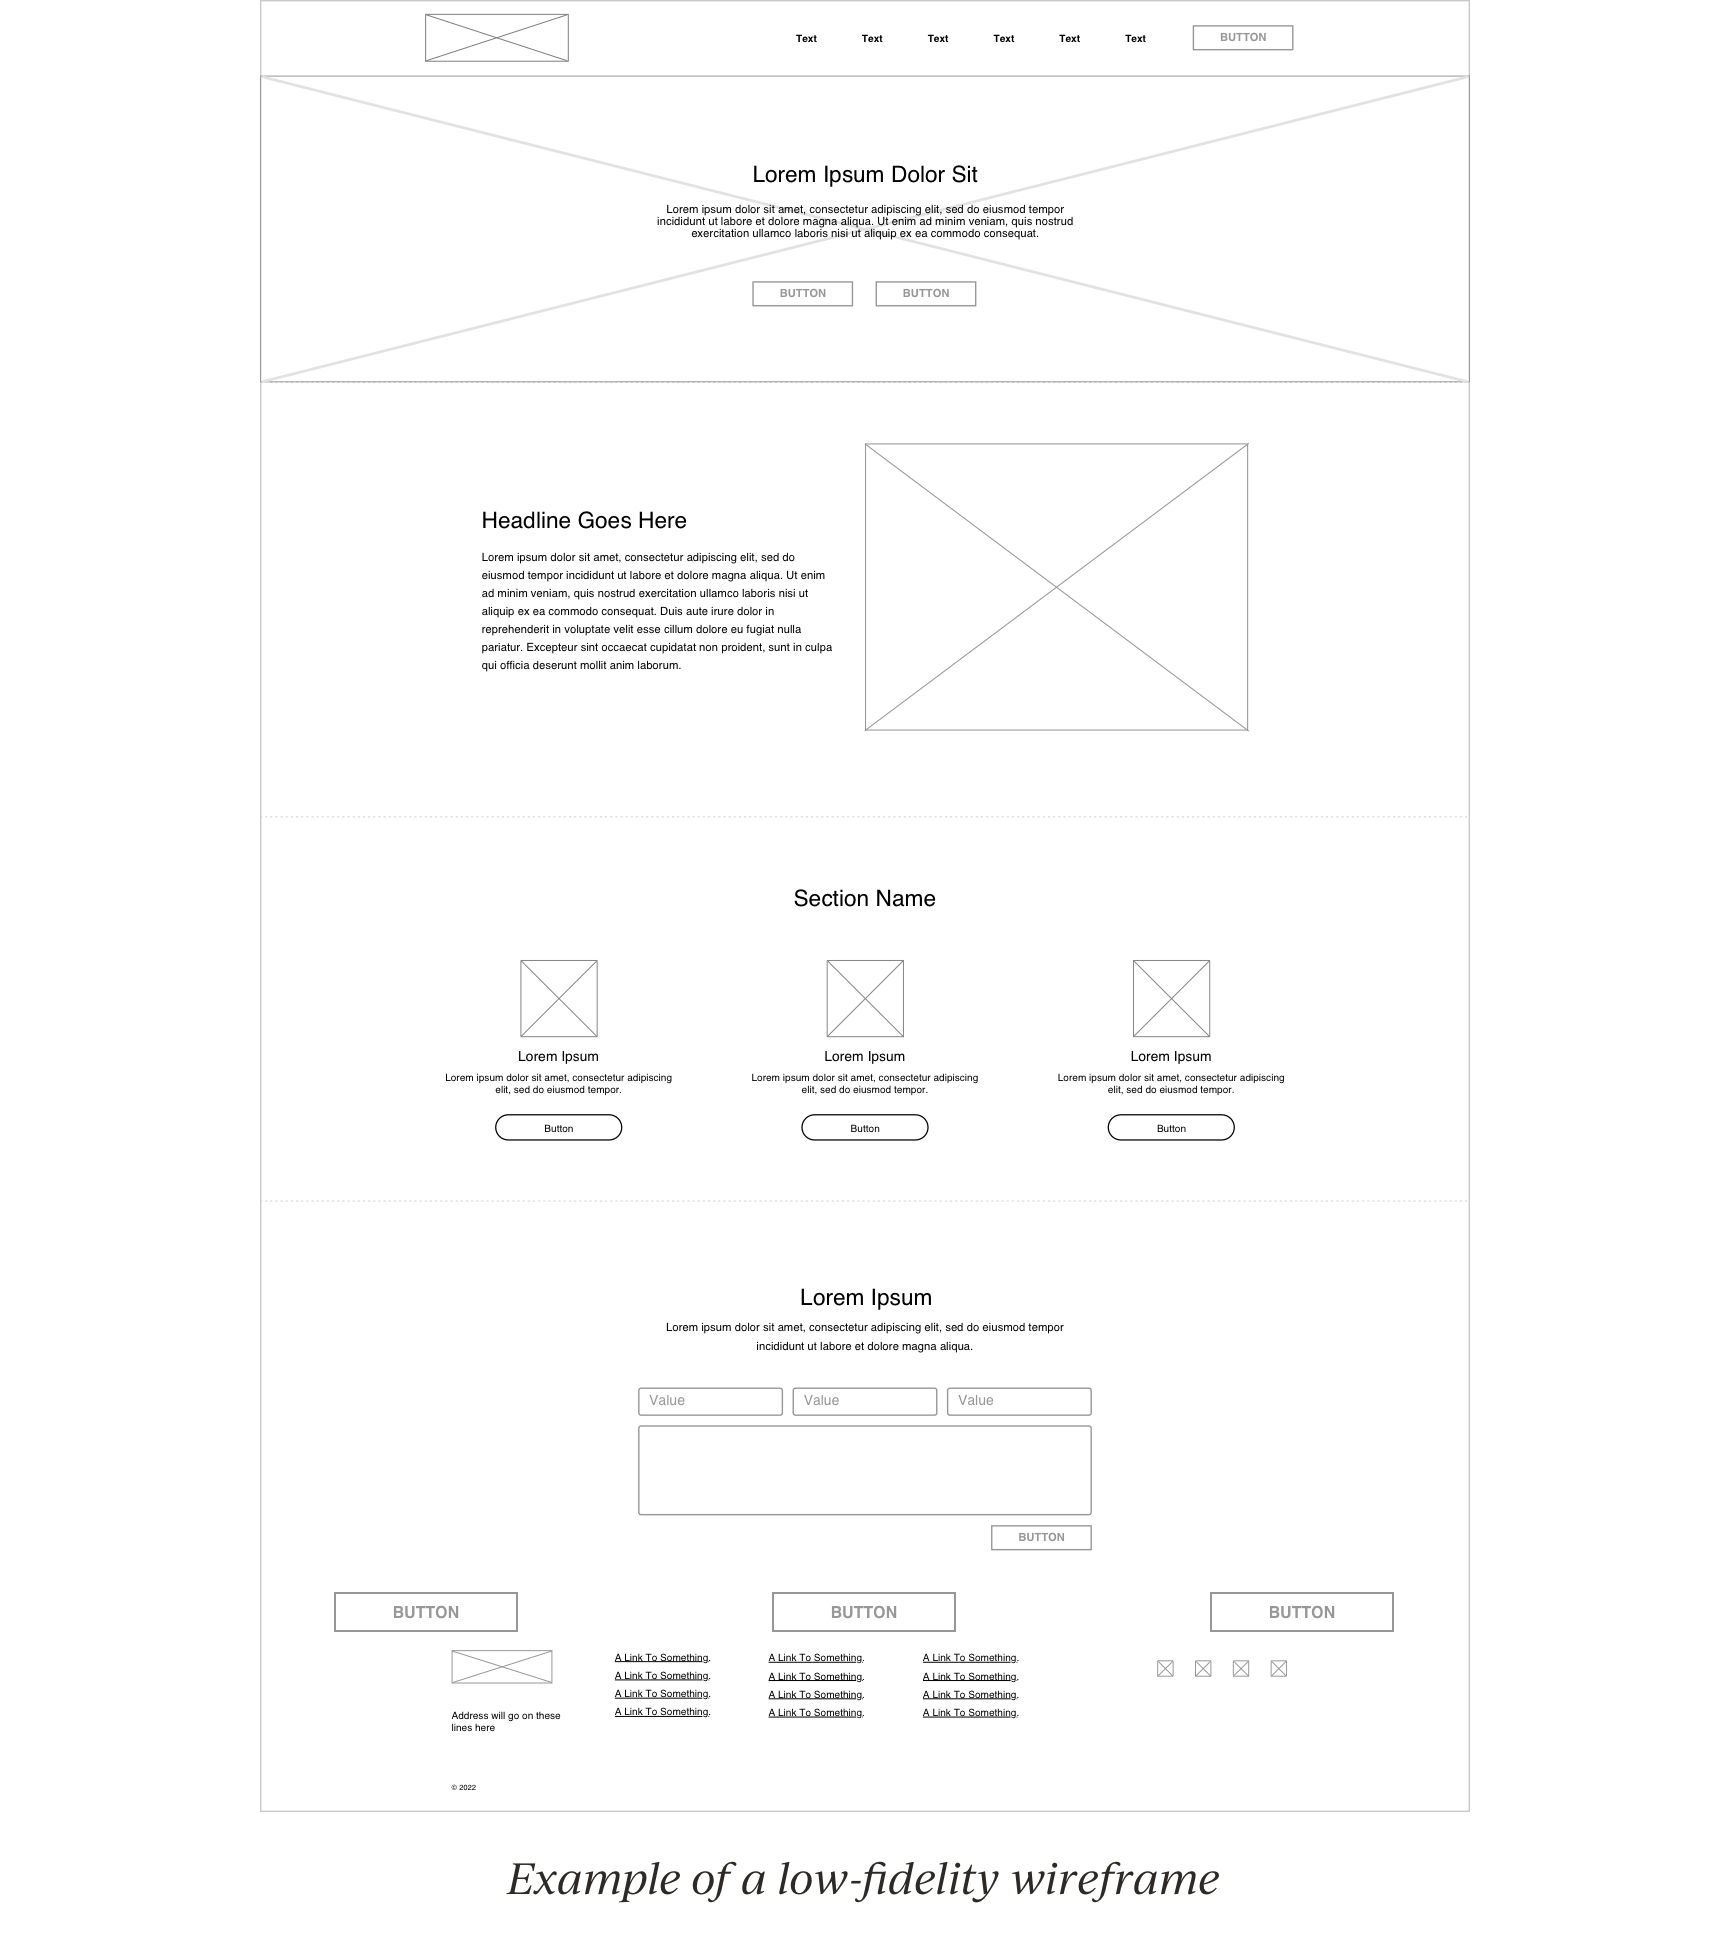 Example of a low-fidelity wireframe showing boxes and other shapes of website outline.